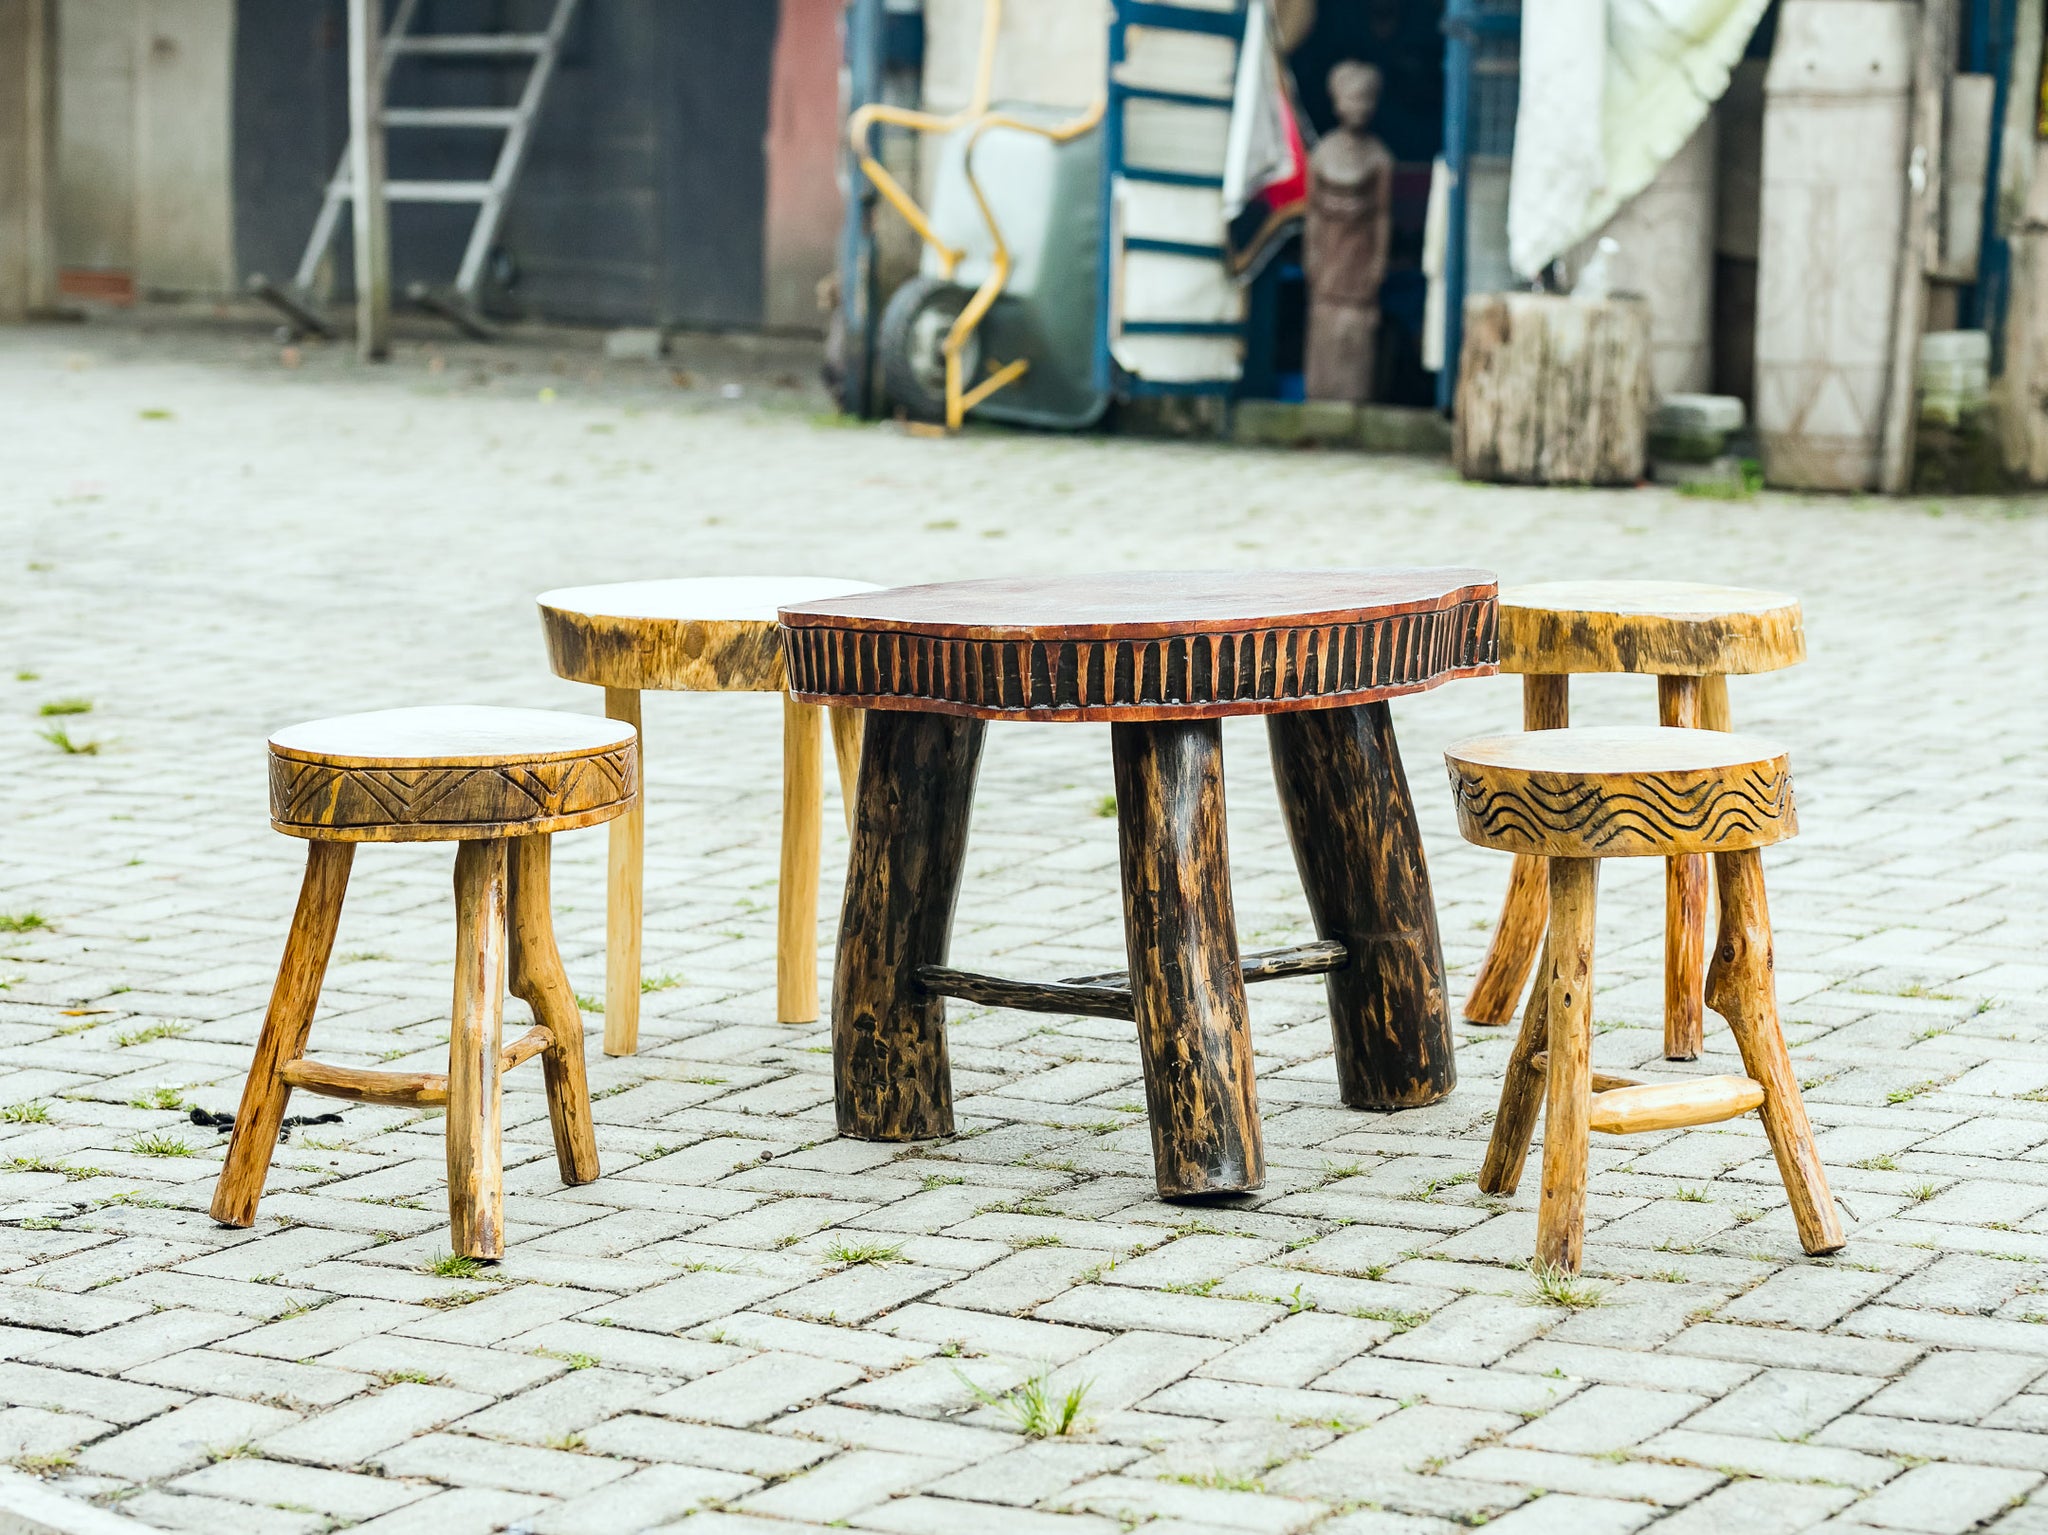 Table (3 legged) and 4 Stools Set, hand-carved of white wood, Ghana, West Africa 69 cm X 51 cm